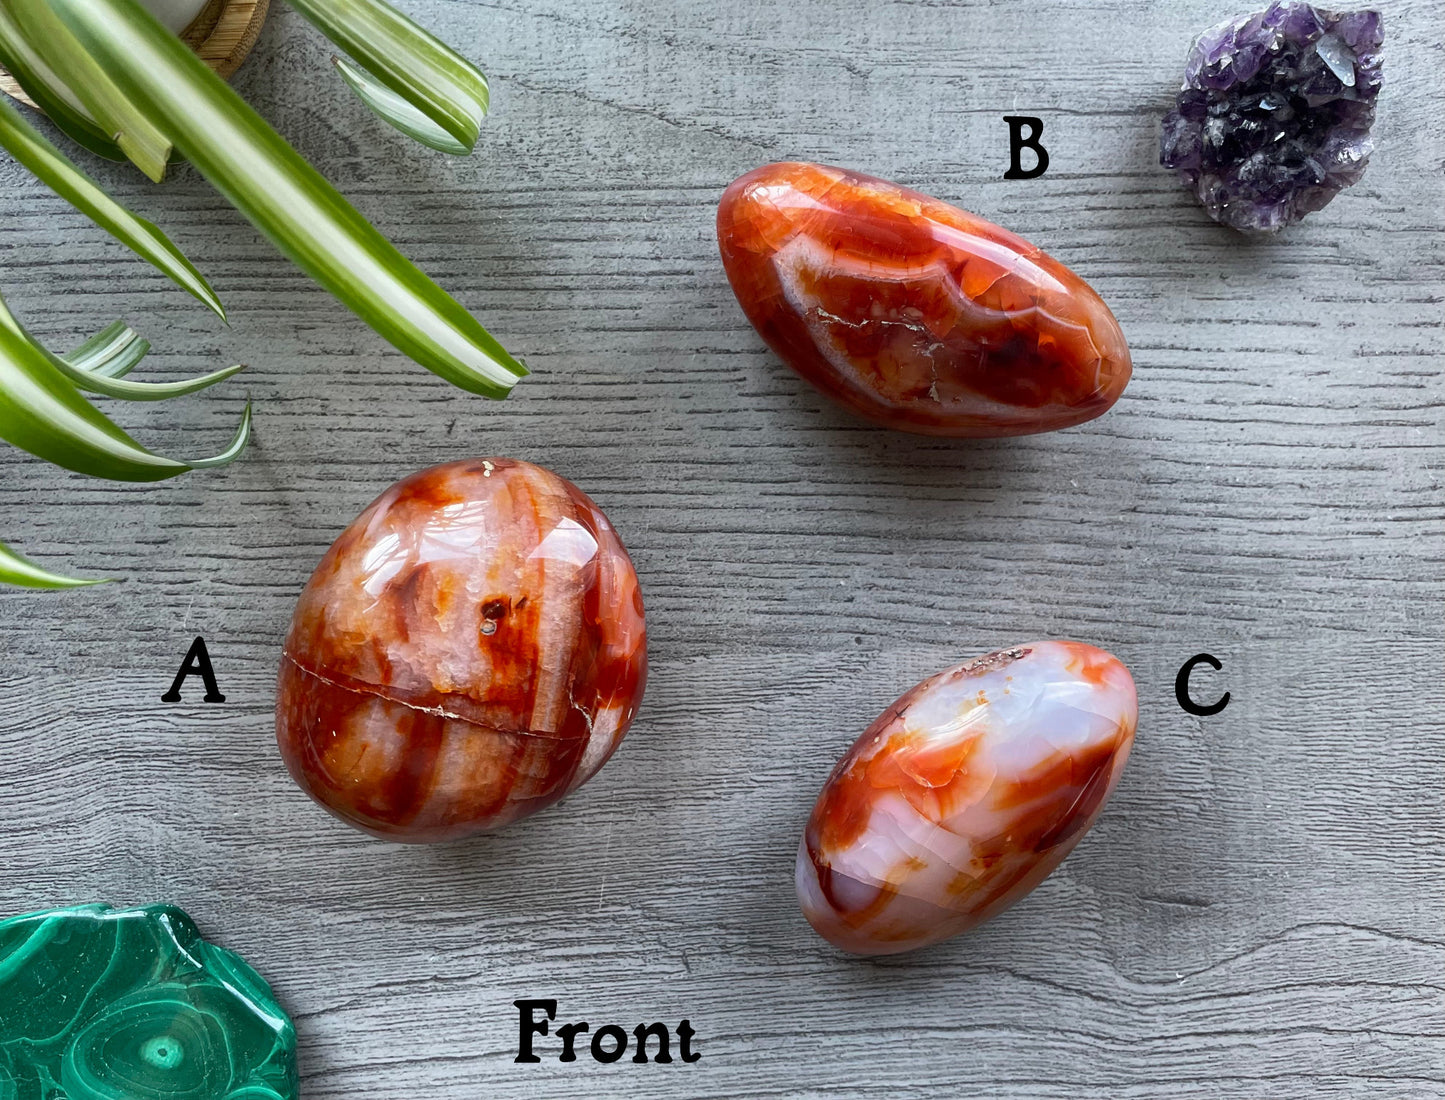 Pictured are various polished carnelian stones.